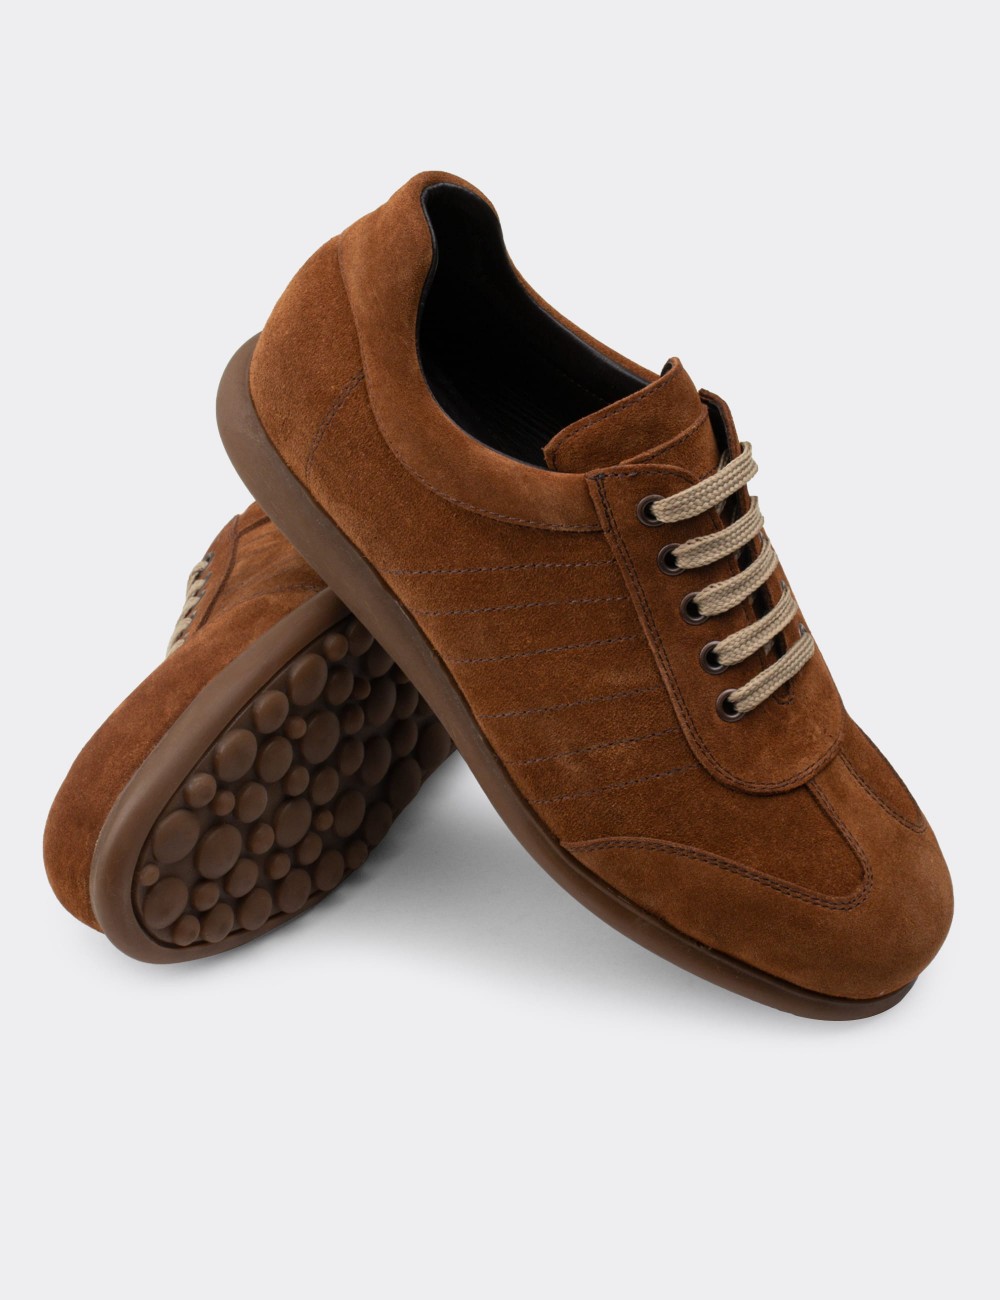 Tan Suede Leather Lace-up Shoes - 01826MTBAC06